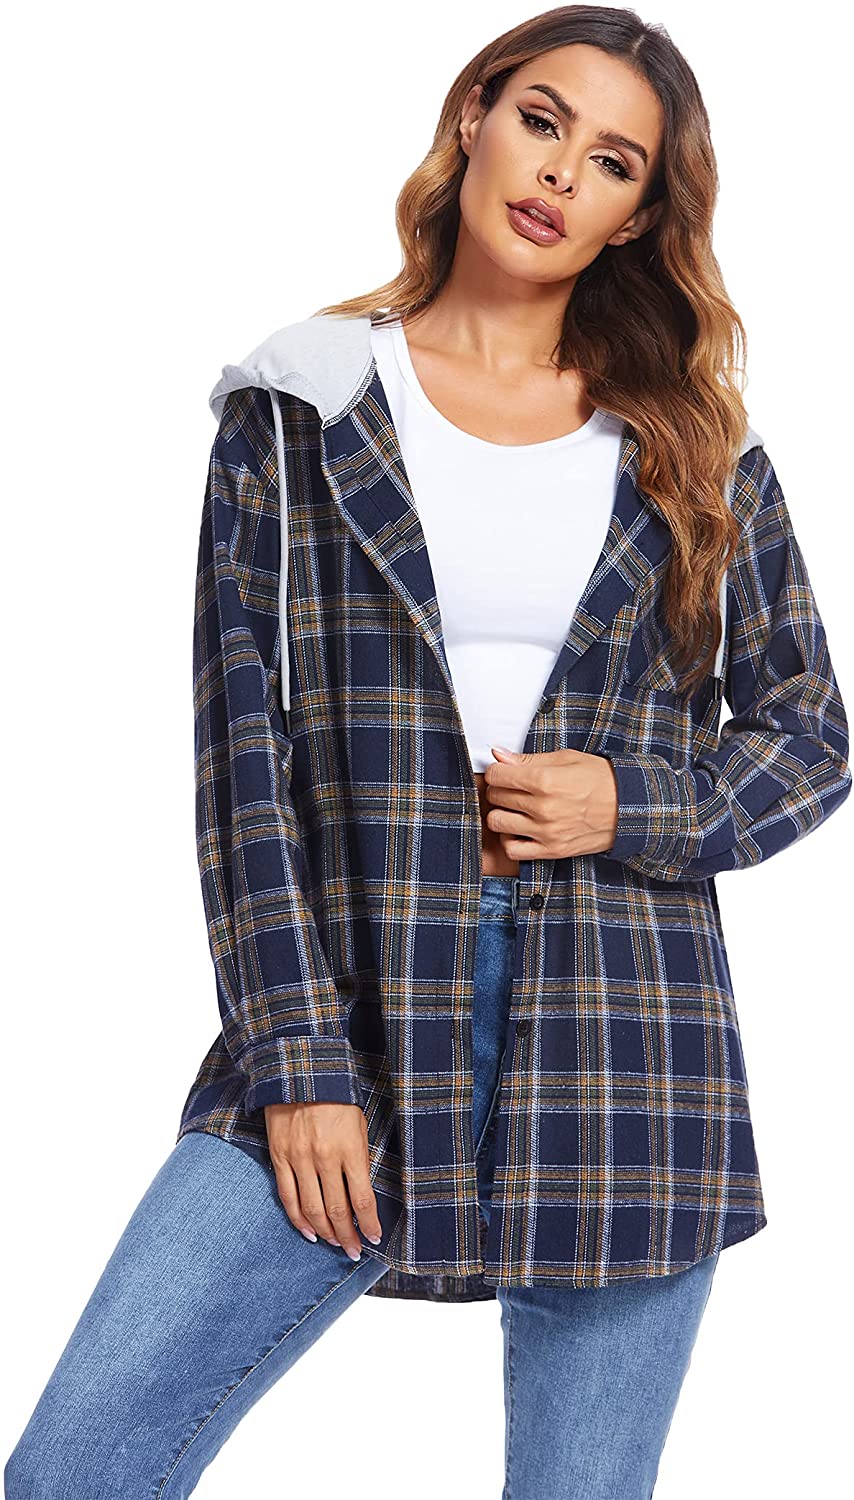 Hotouch Womens Flannel Shirts Plaid Hoodie Jacket Long Sleeve